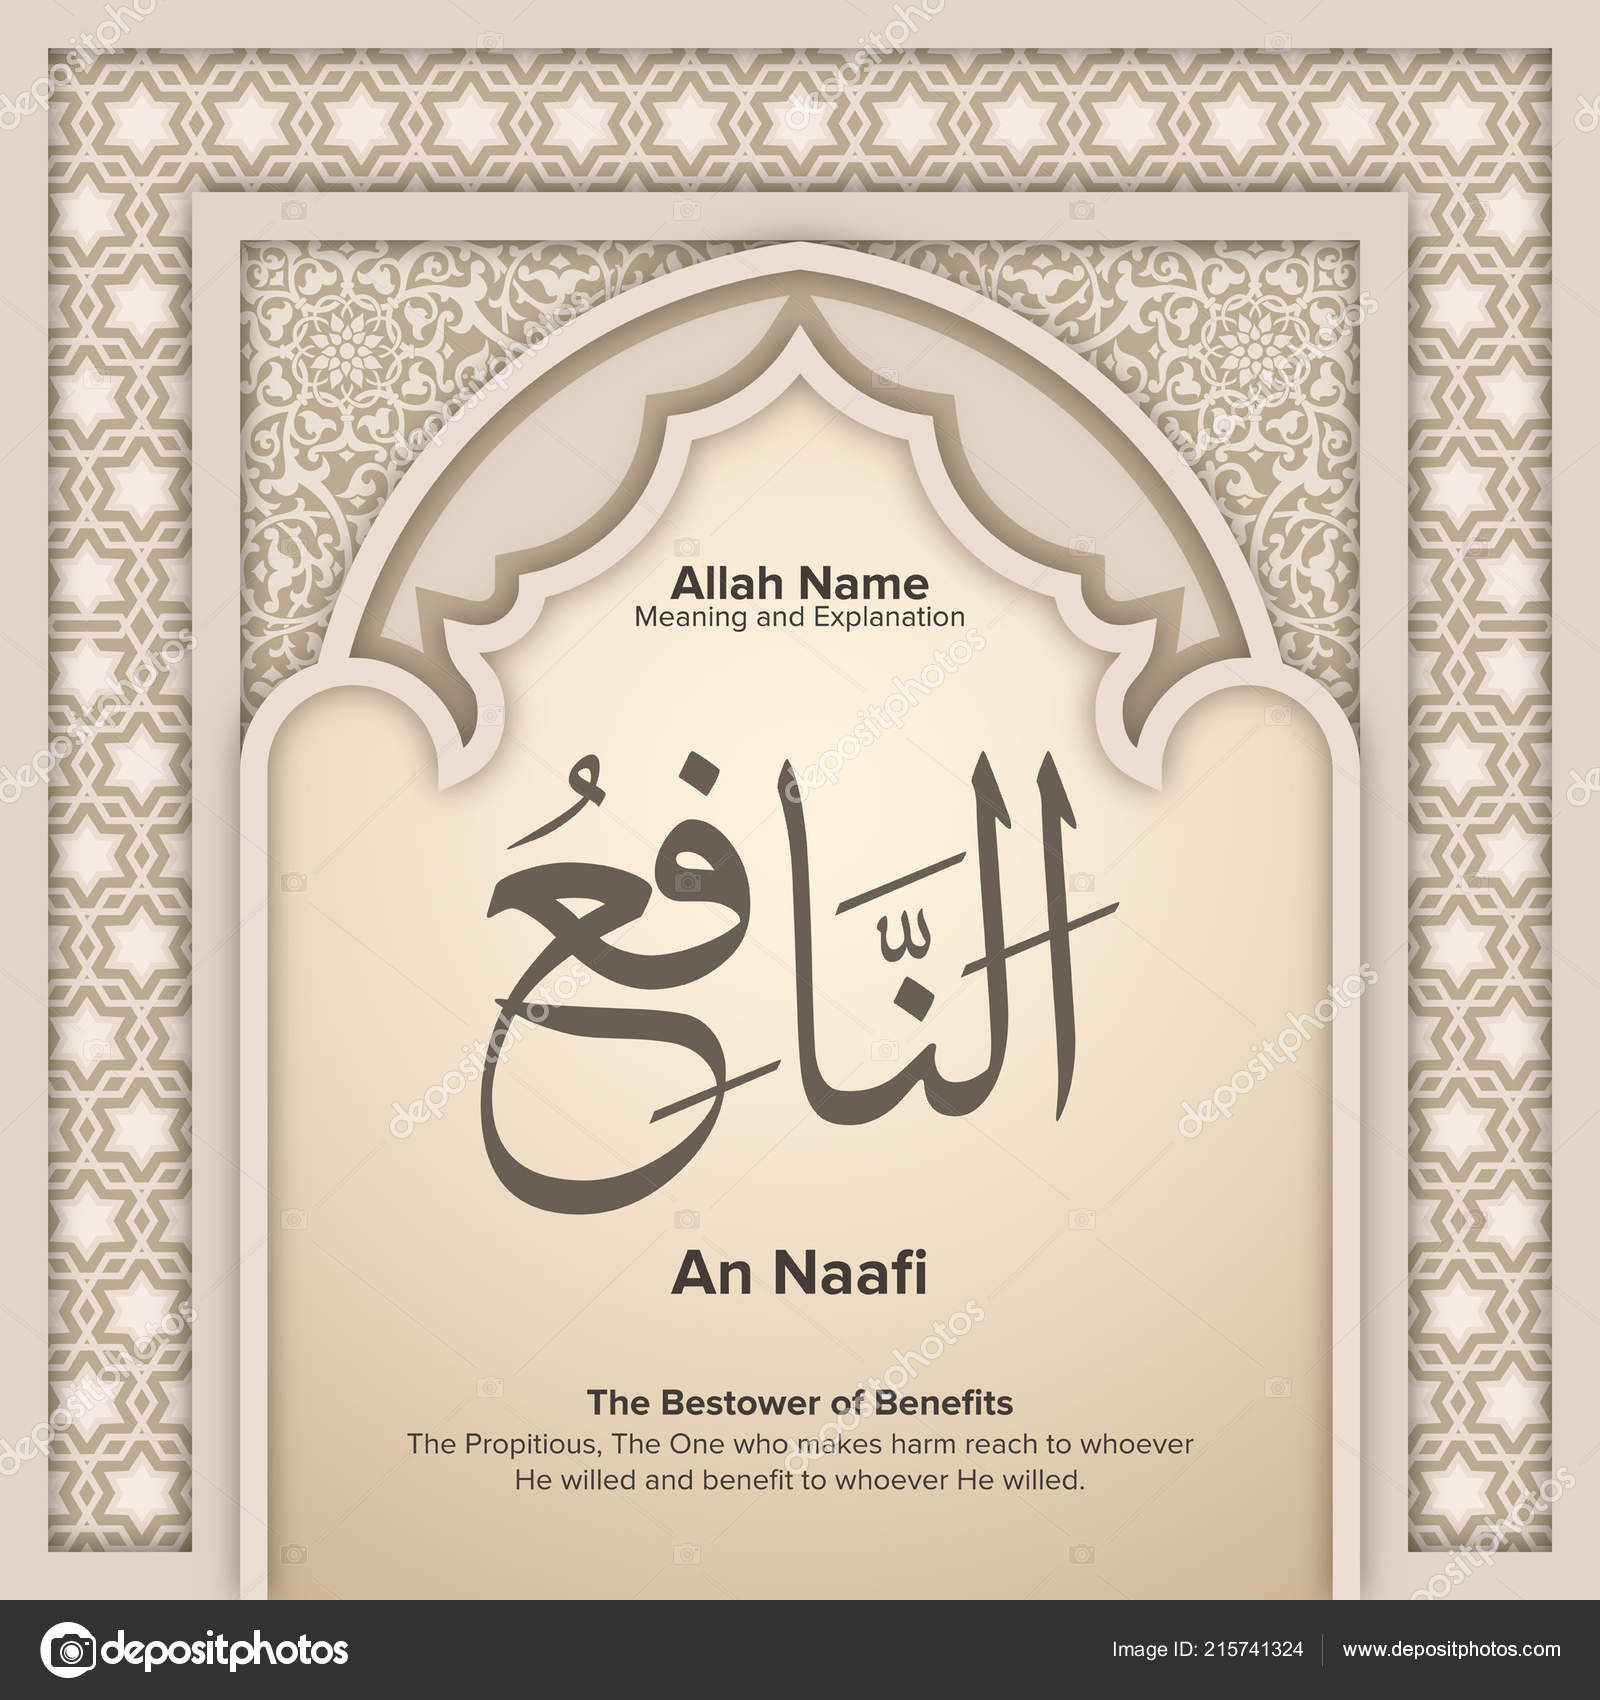 99 names of allah in arabic with meanings in english